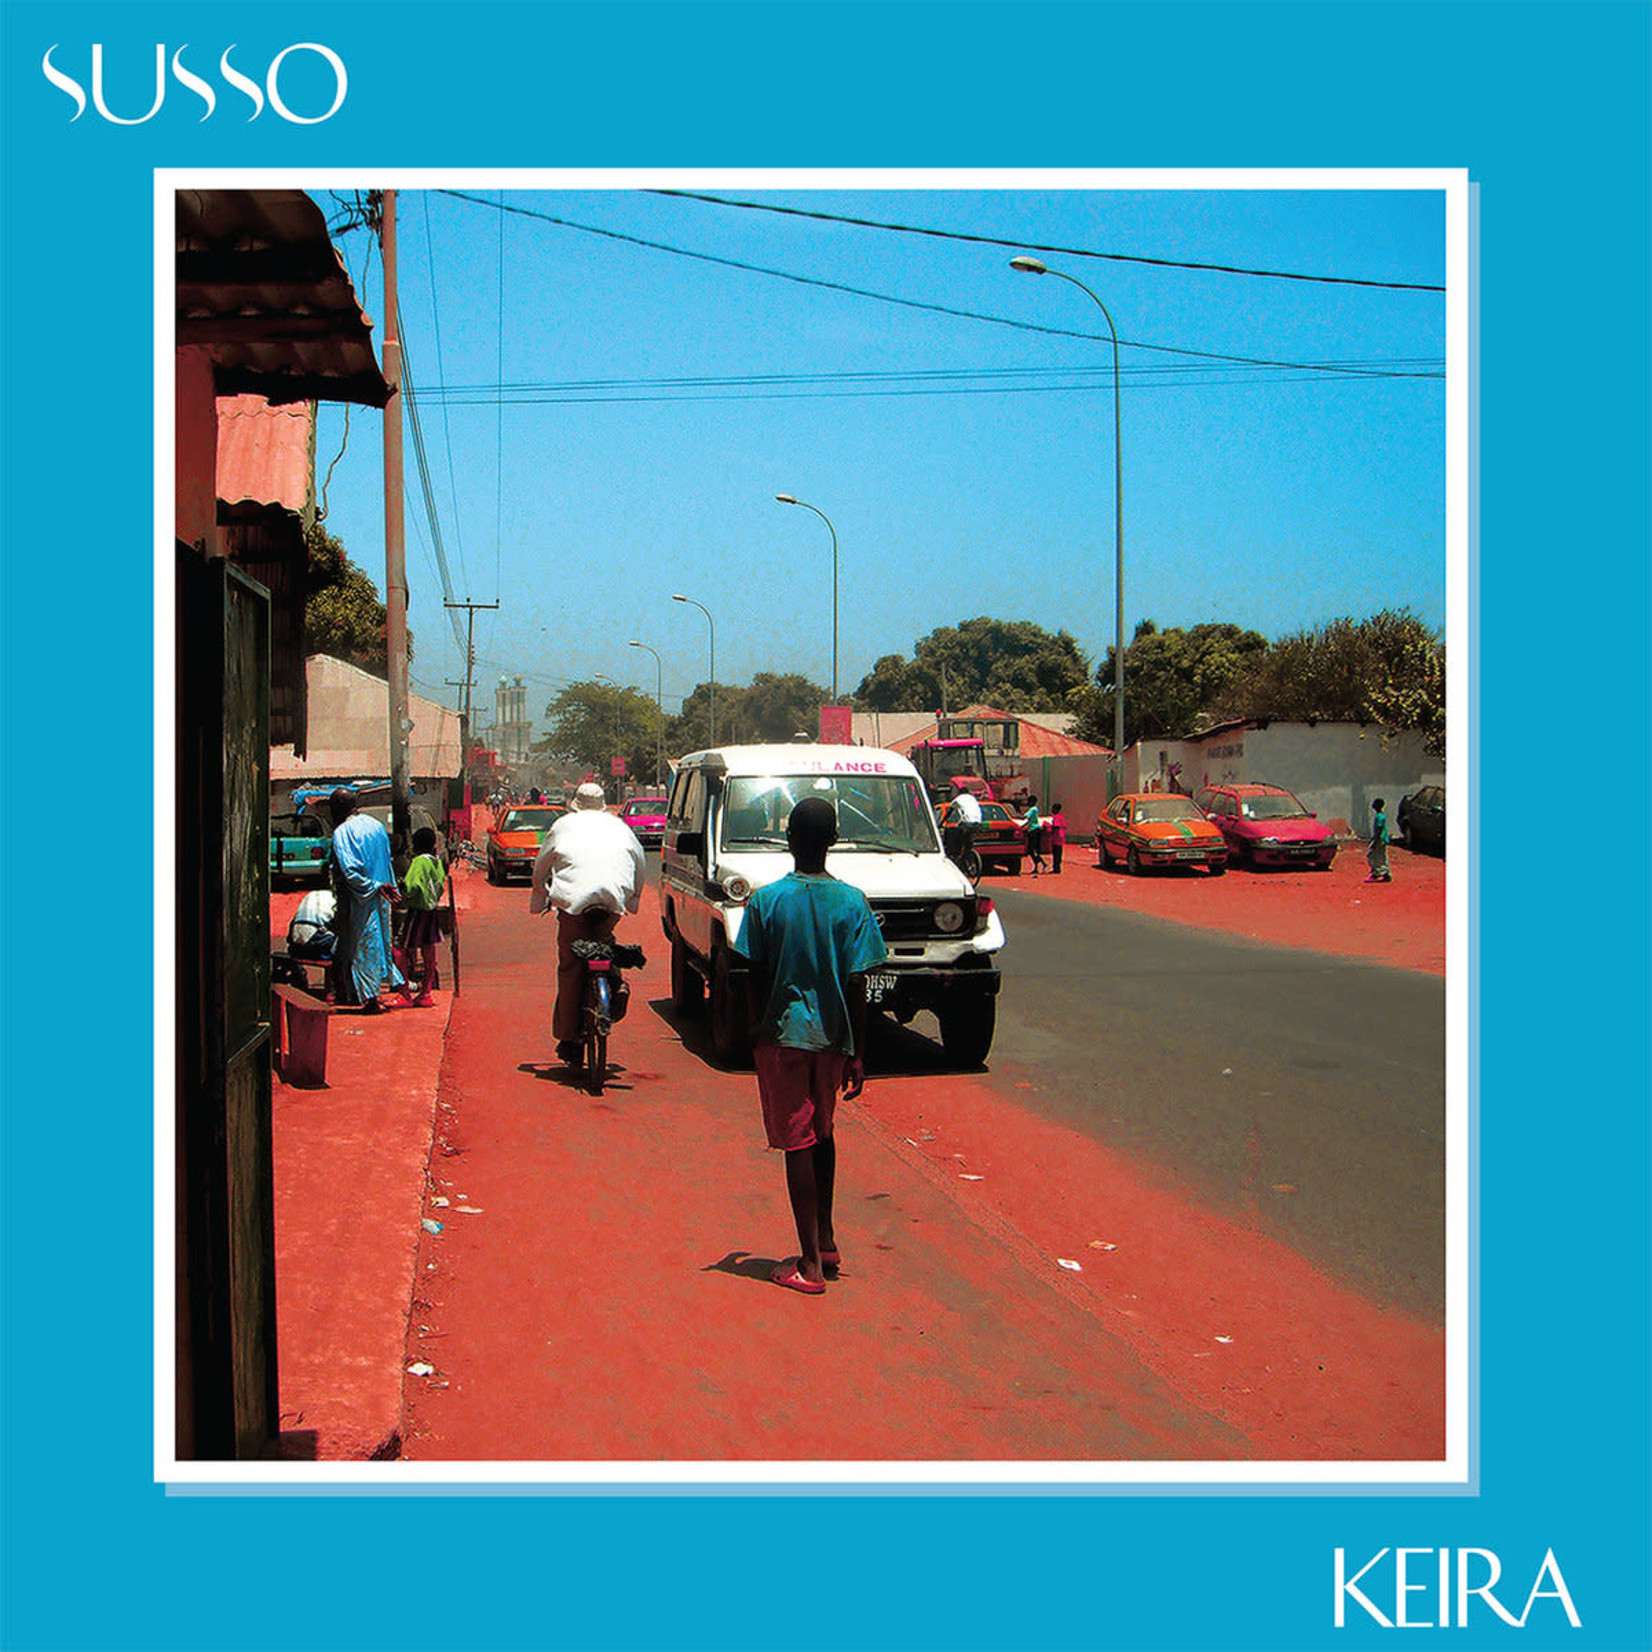 [New] Susso - Keira